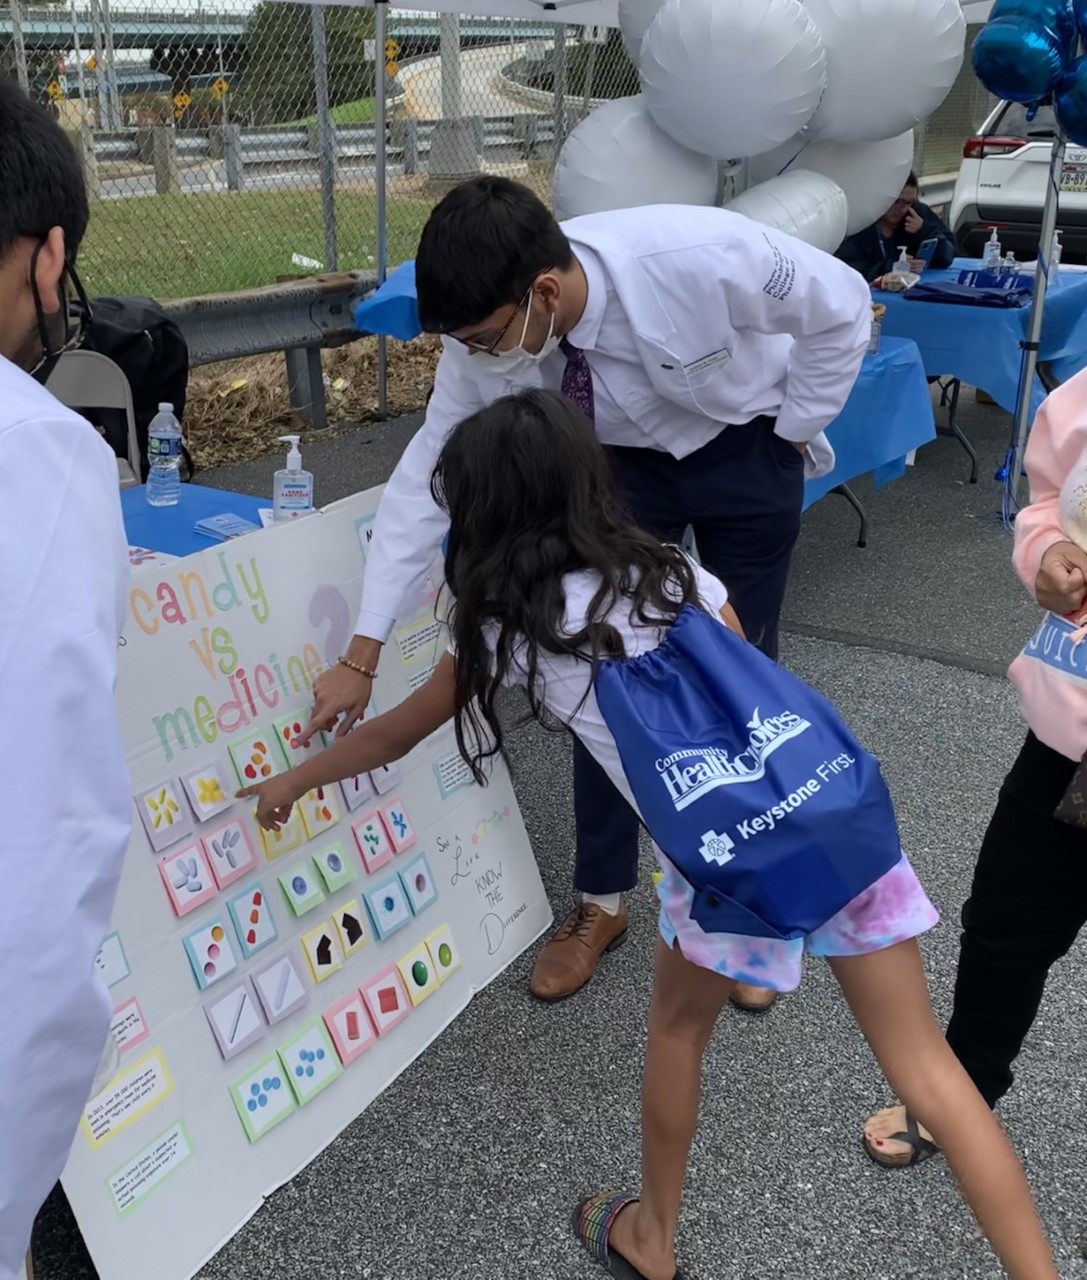 A USciences pharmacy student explains a chart titled "Medicine vs Candy" to a young girl